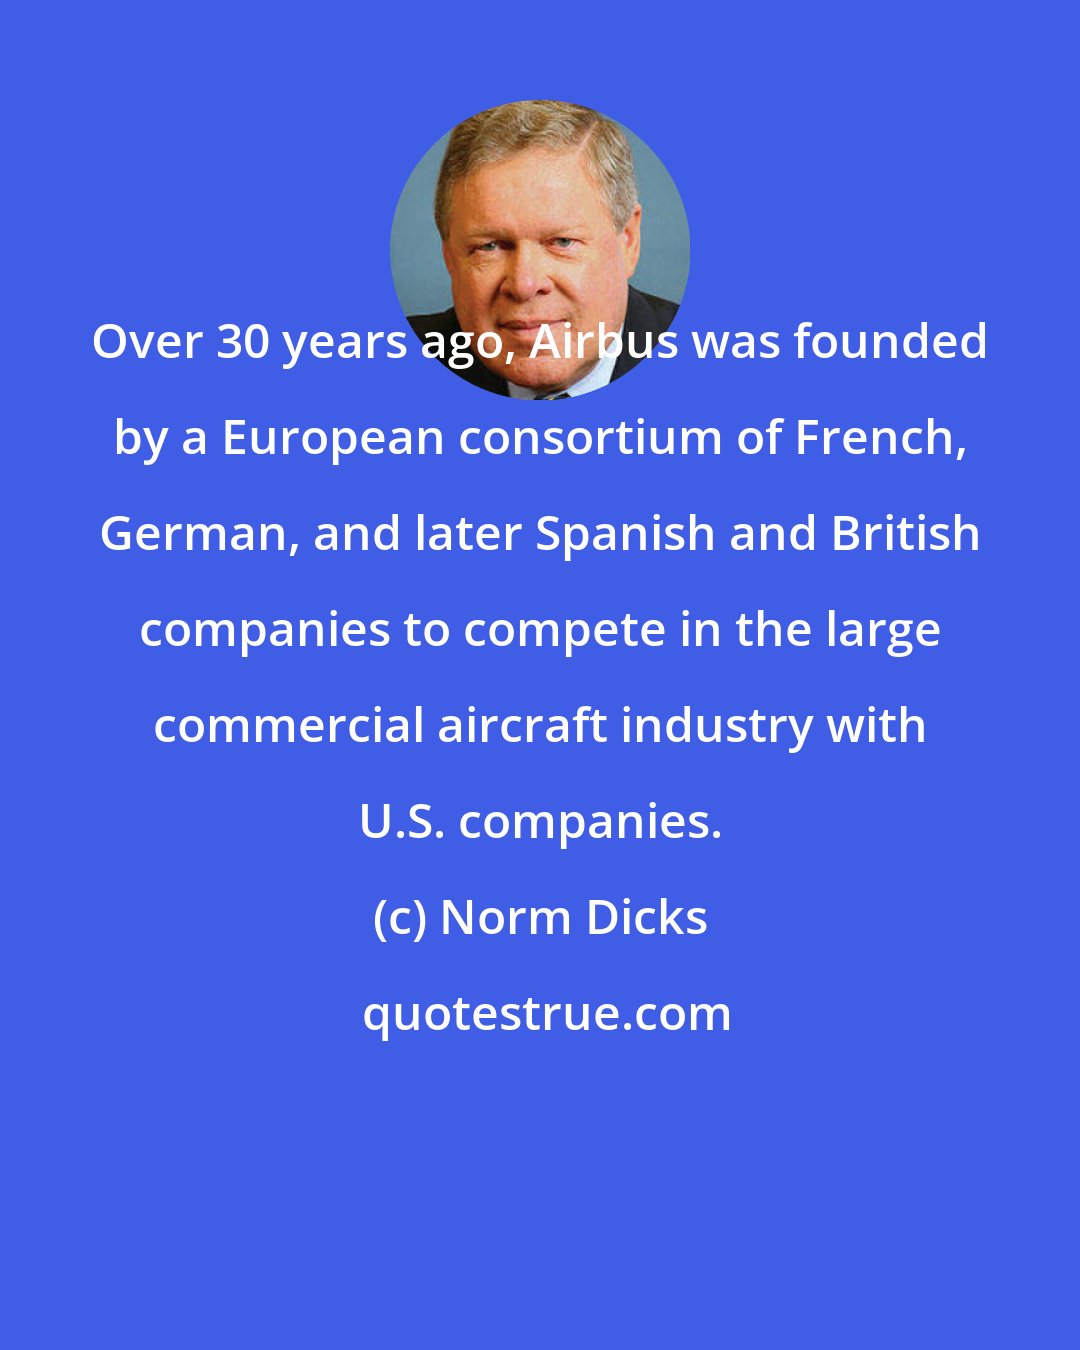 Norm Dicks: Over 30 years ago, Airbus was founded by a European consortium of French, German, and later Spanish and British companies to compete in the large commercial aircraft industry with U.S. companies.